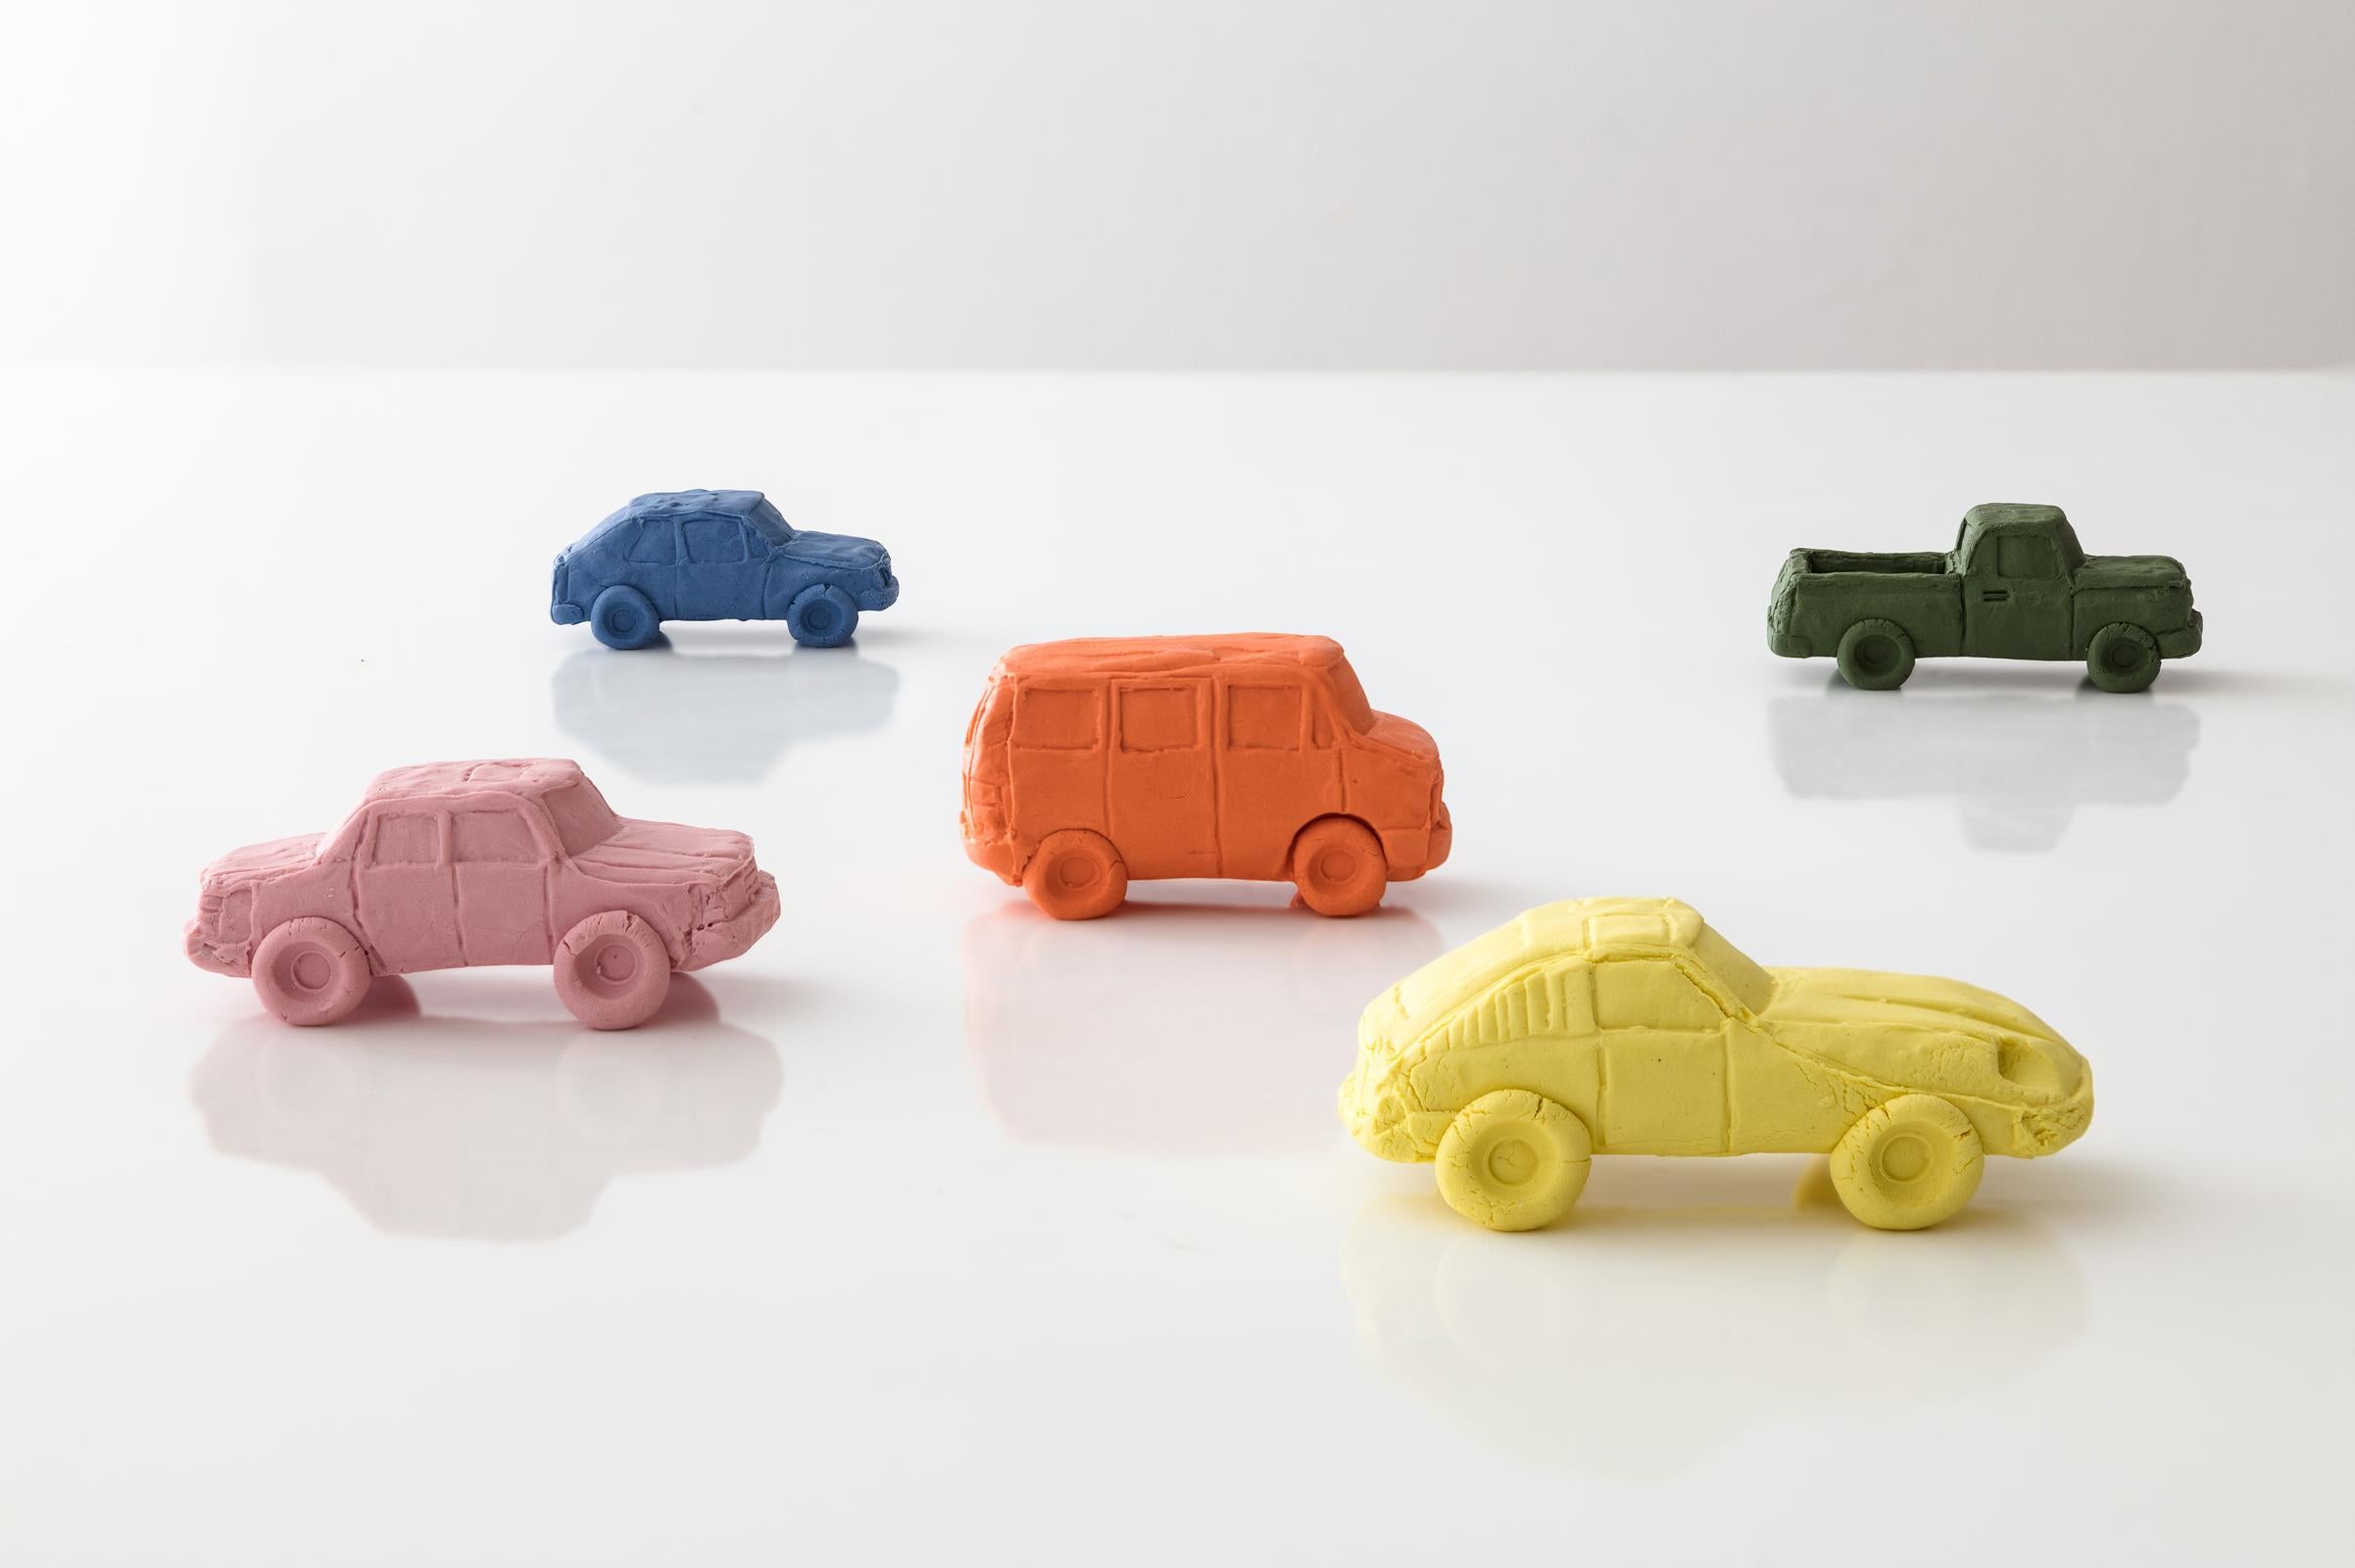 Keith Simpson's miniature porcelain Ceramic Cars sculptures reflect memories of vehicles from his childhood and the 1980's. With Fort Makers, he chose colors and silhouettes of cars that are charming and magnetic, yet also somewhat humble. Keith